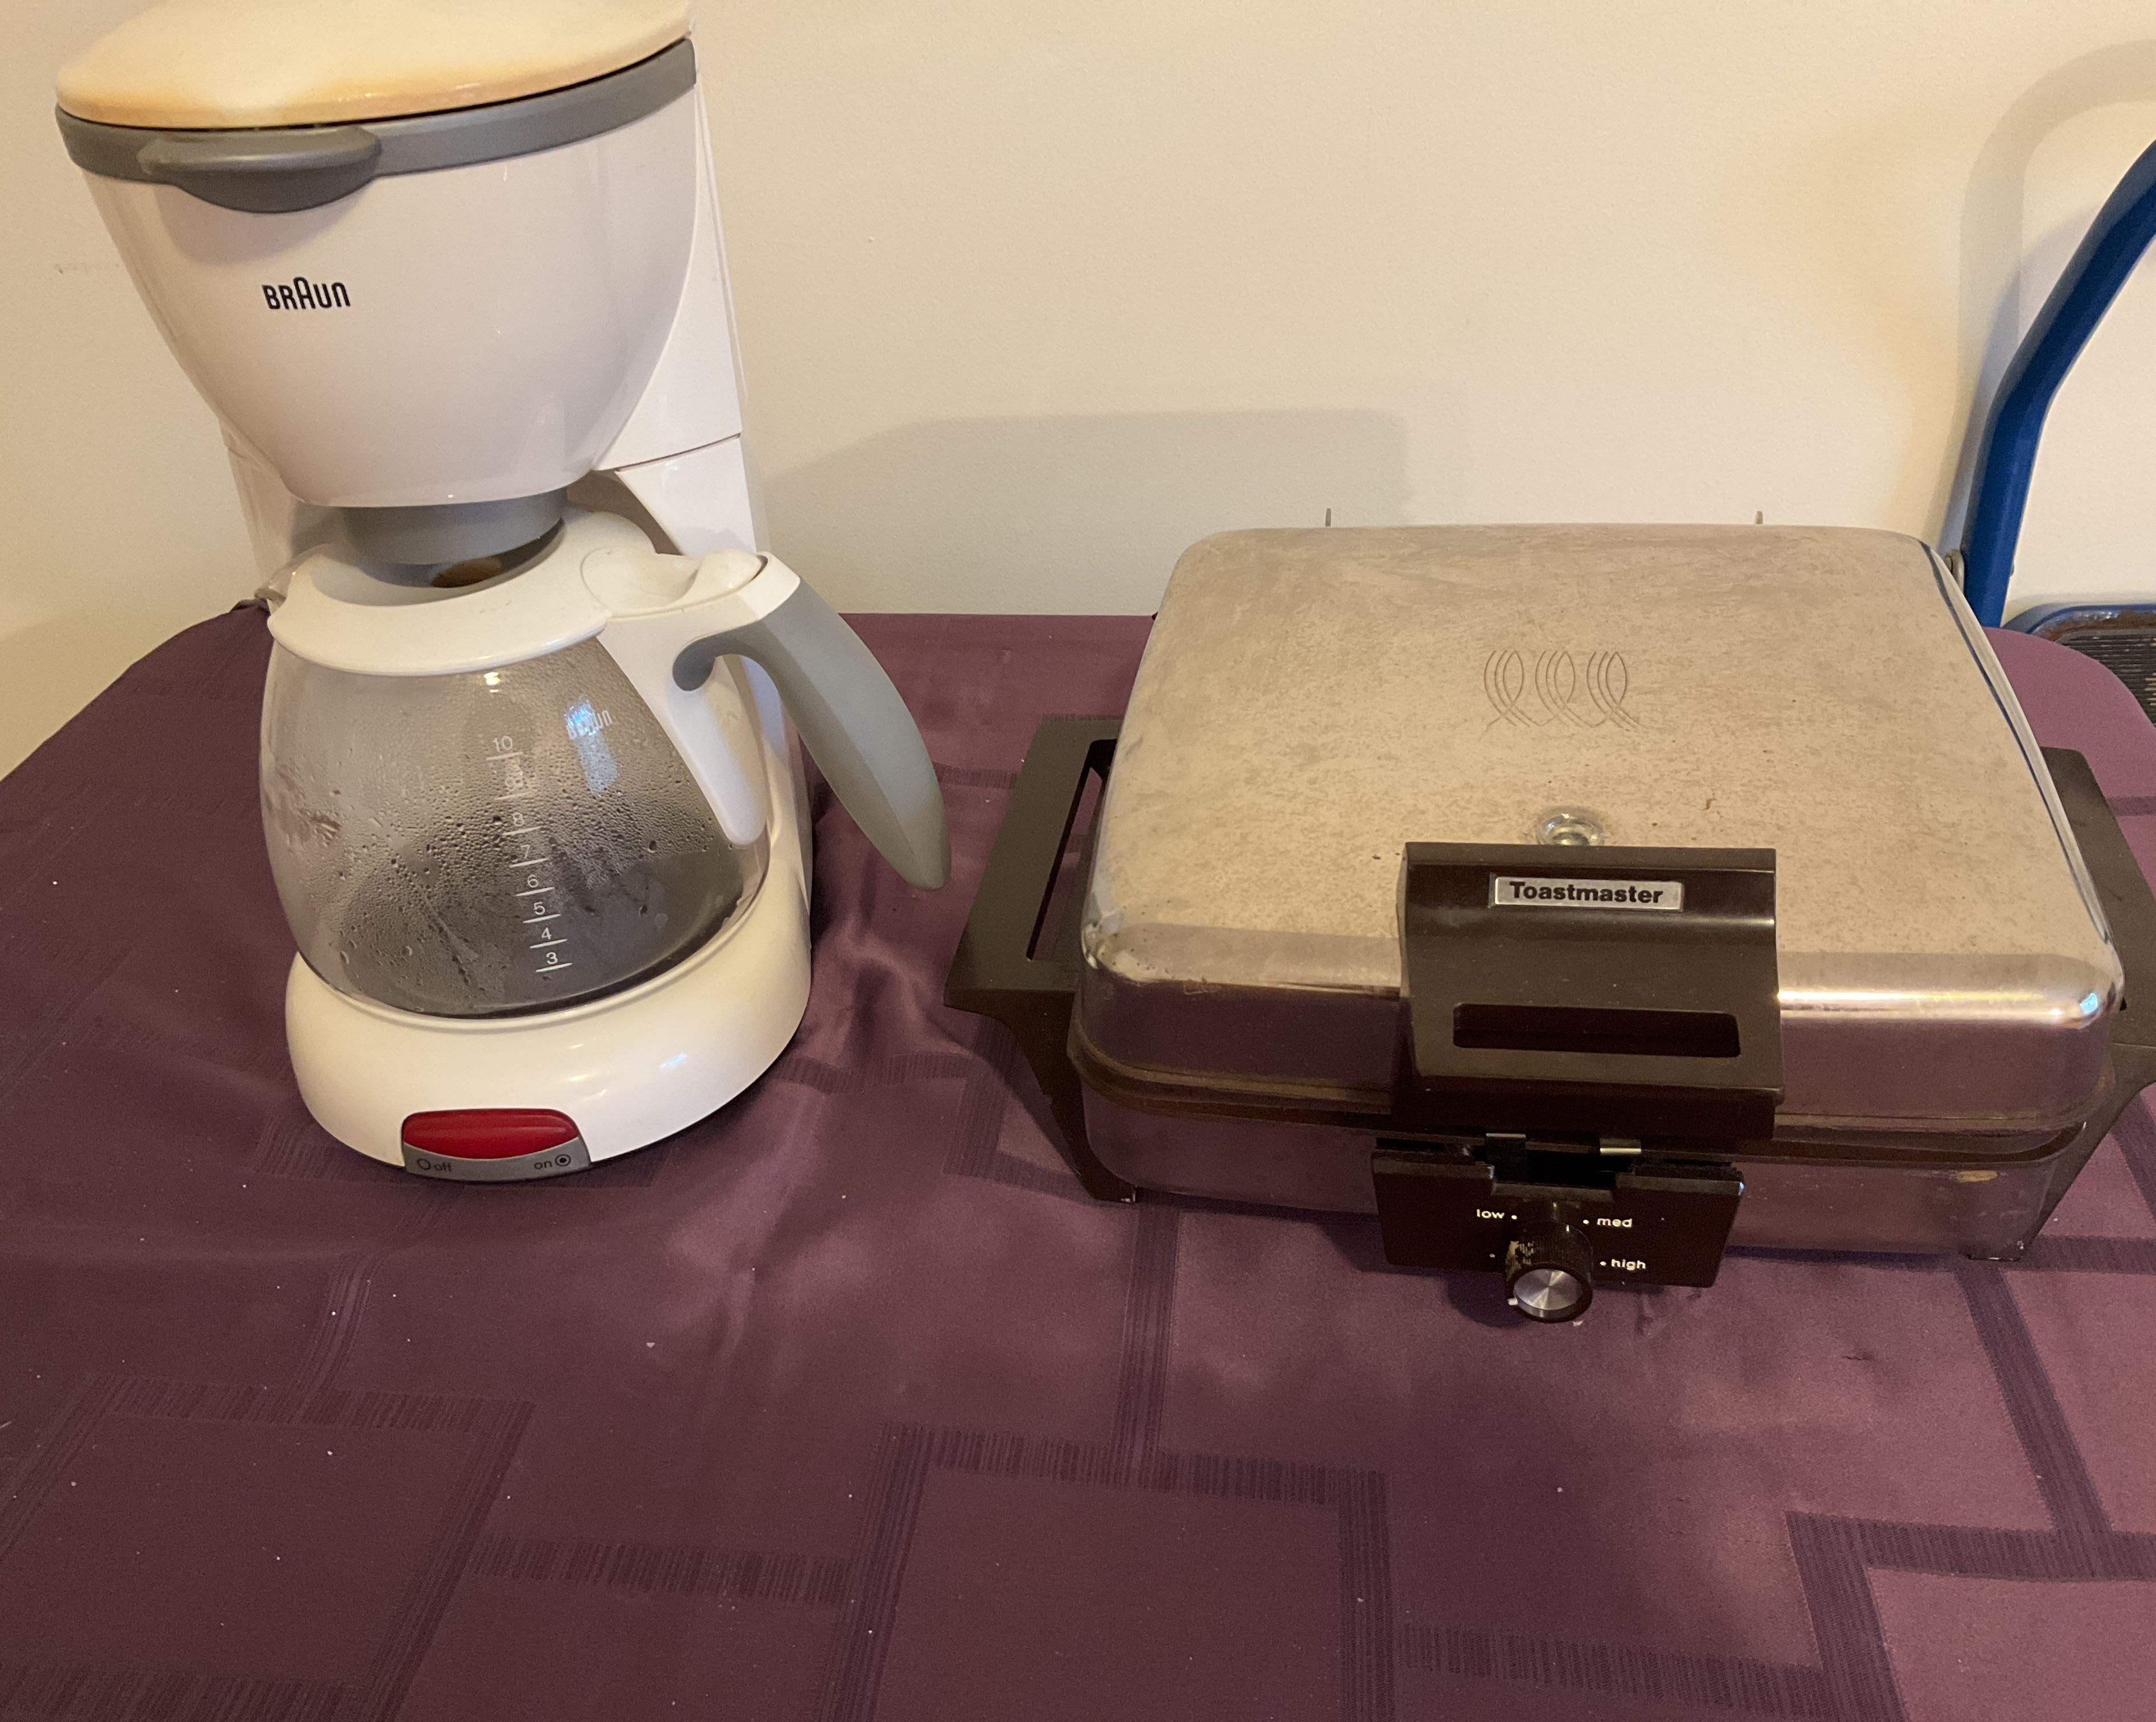 Toastmaster Coffee Maker, Bathroom Faucet, Welbilt Bread Oven, Coffee Mugs,  and Cordless Desk Lamps - Sherwood Auctions